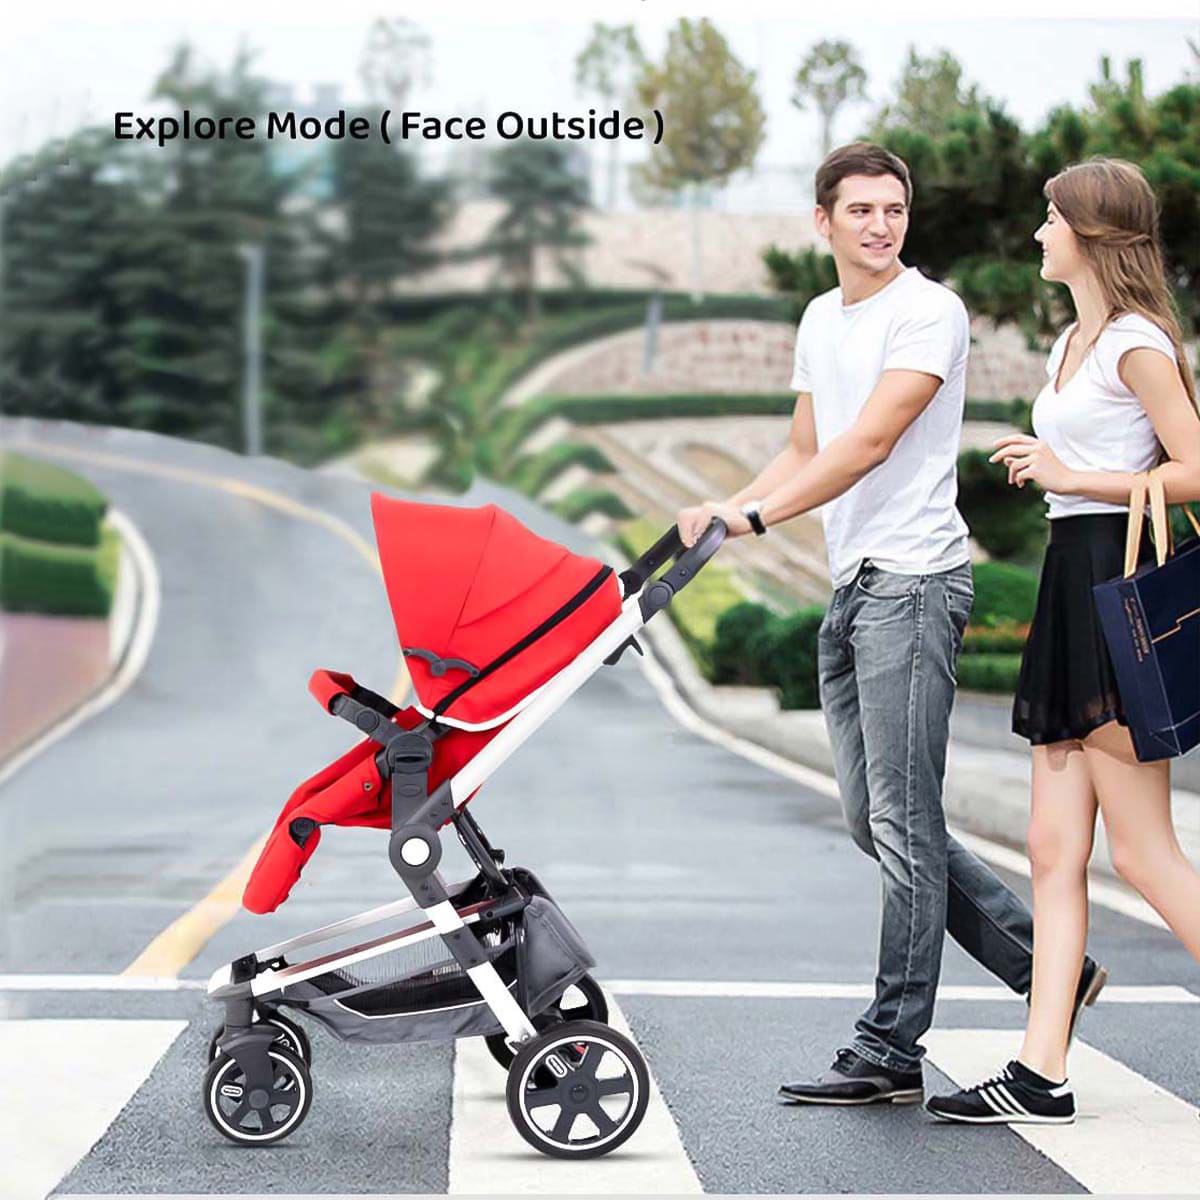 A joyful baby stroller with a comfortable seat and colorful accessories.